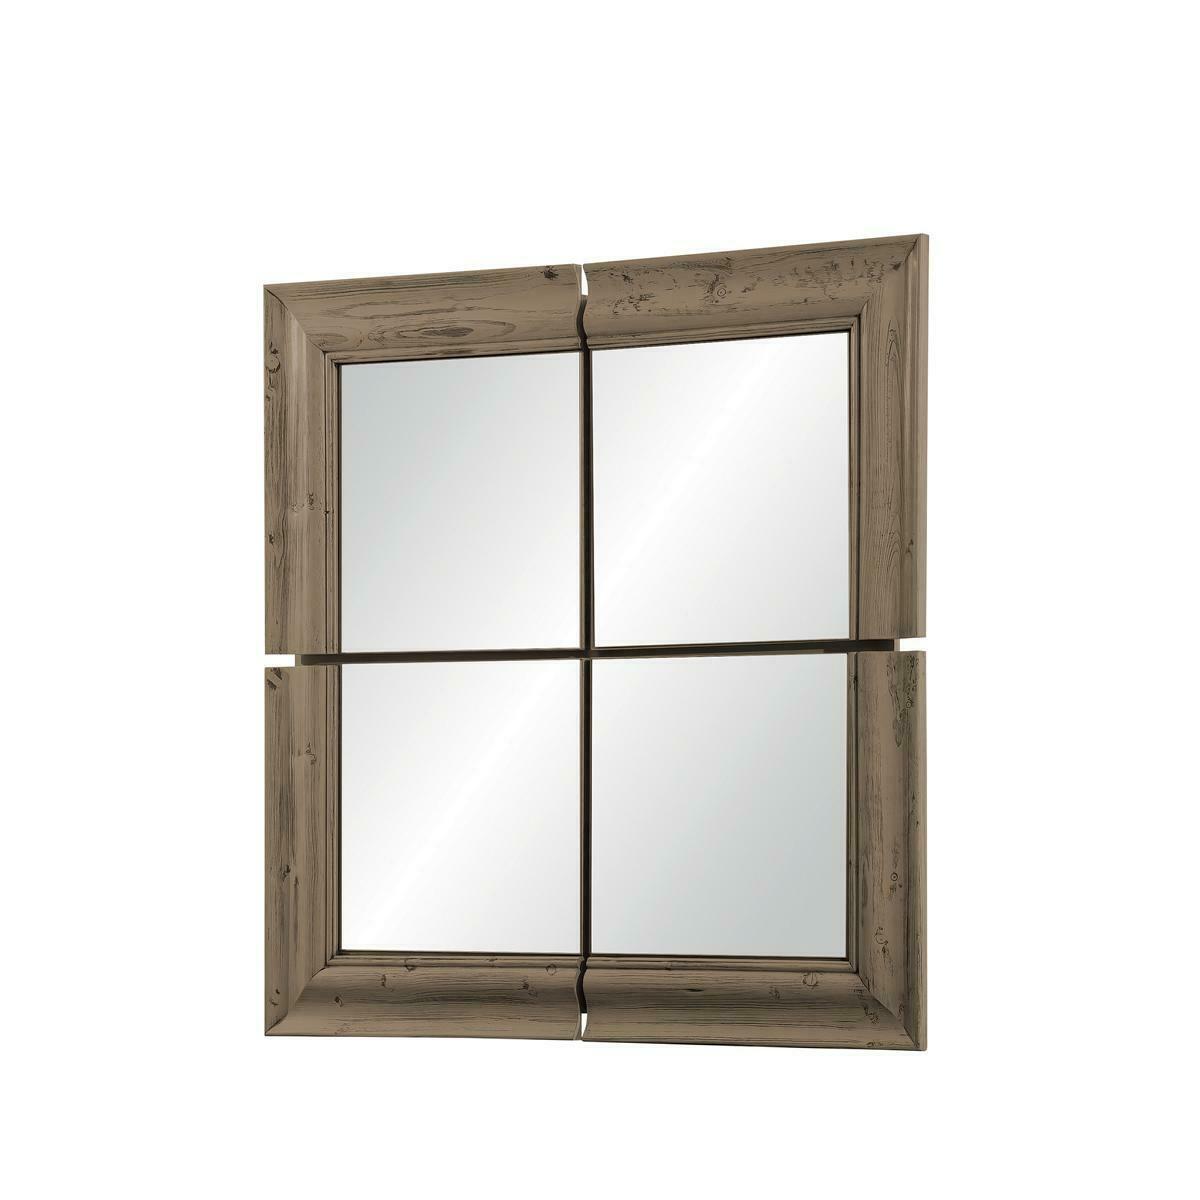 Modern style made of real wooden frame square wall mirror 105*105cm size, model - CE-1